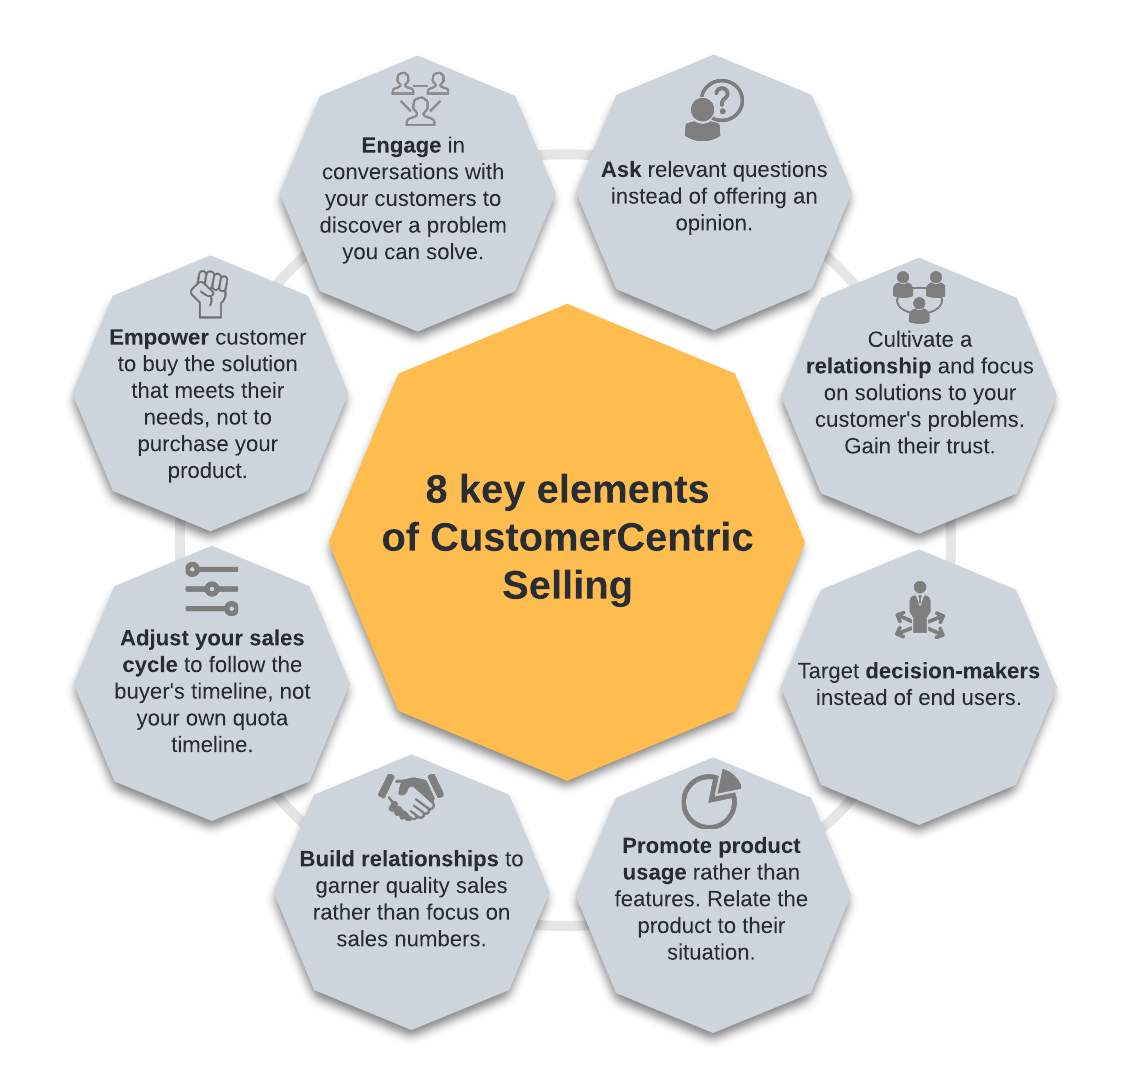 Customer-Centric Selling